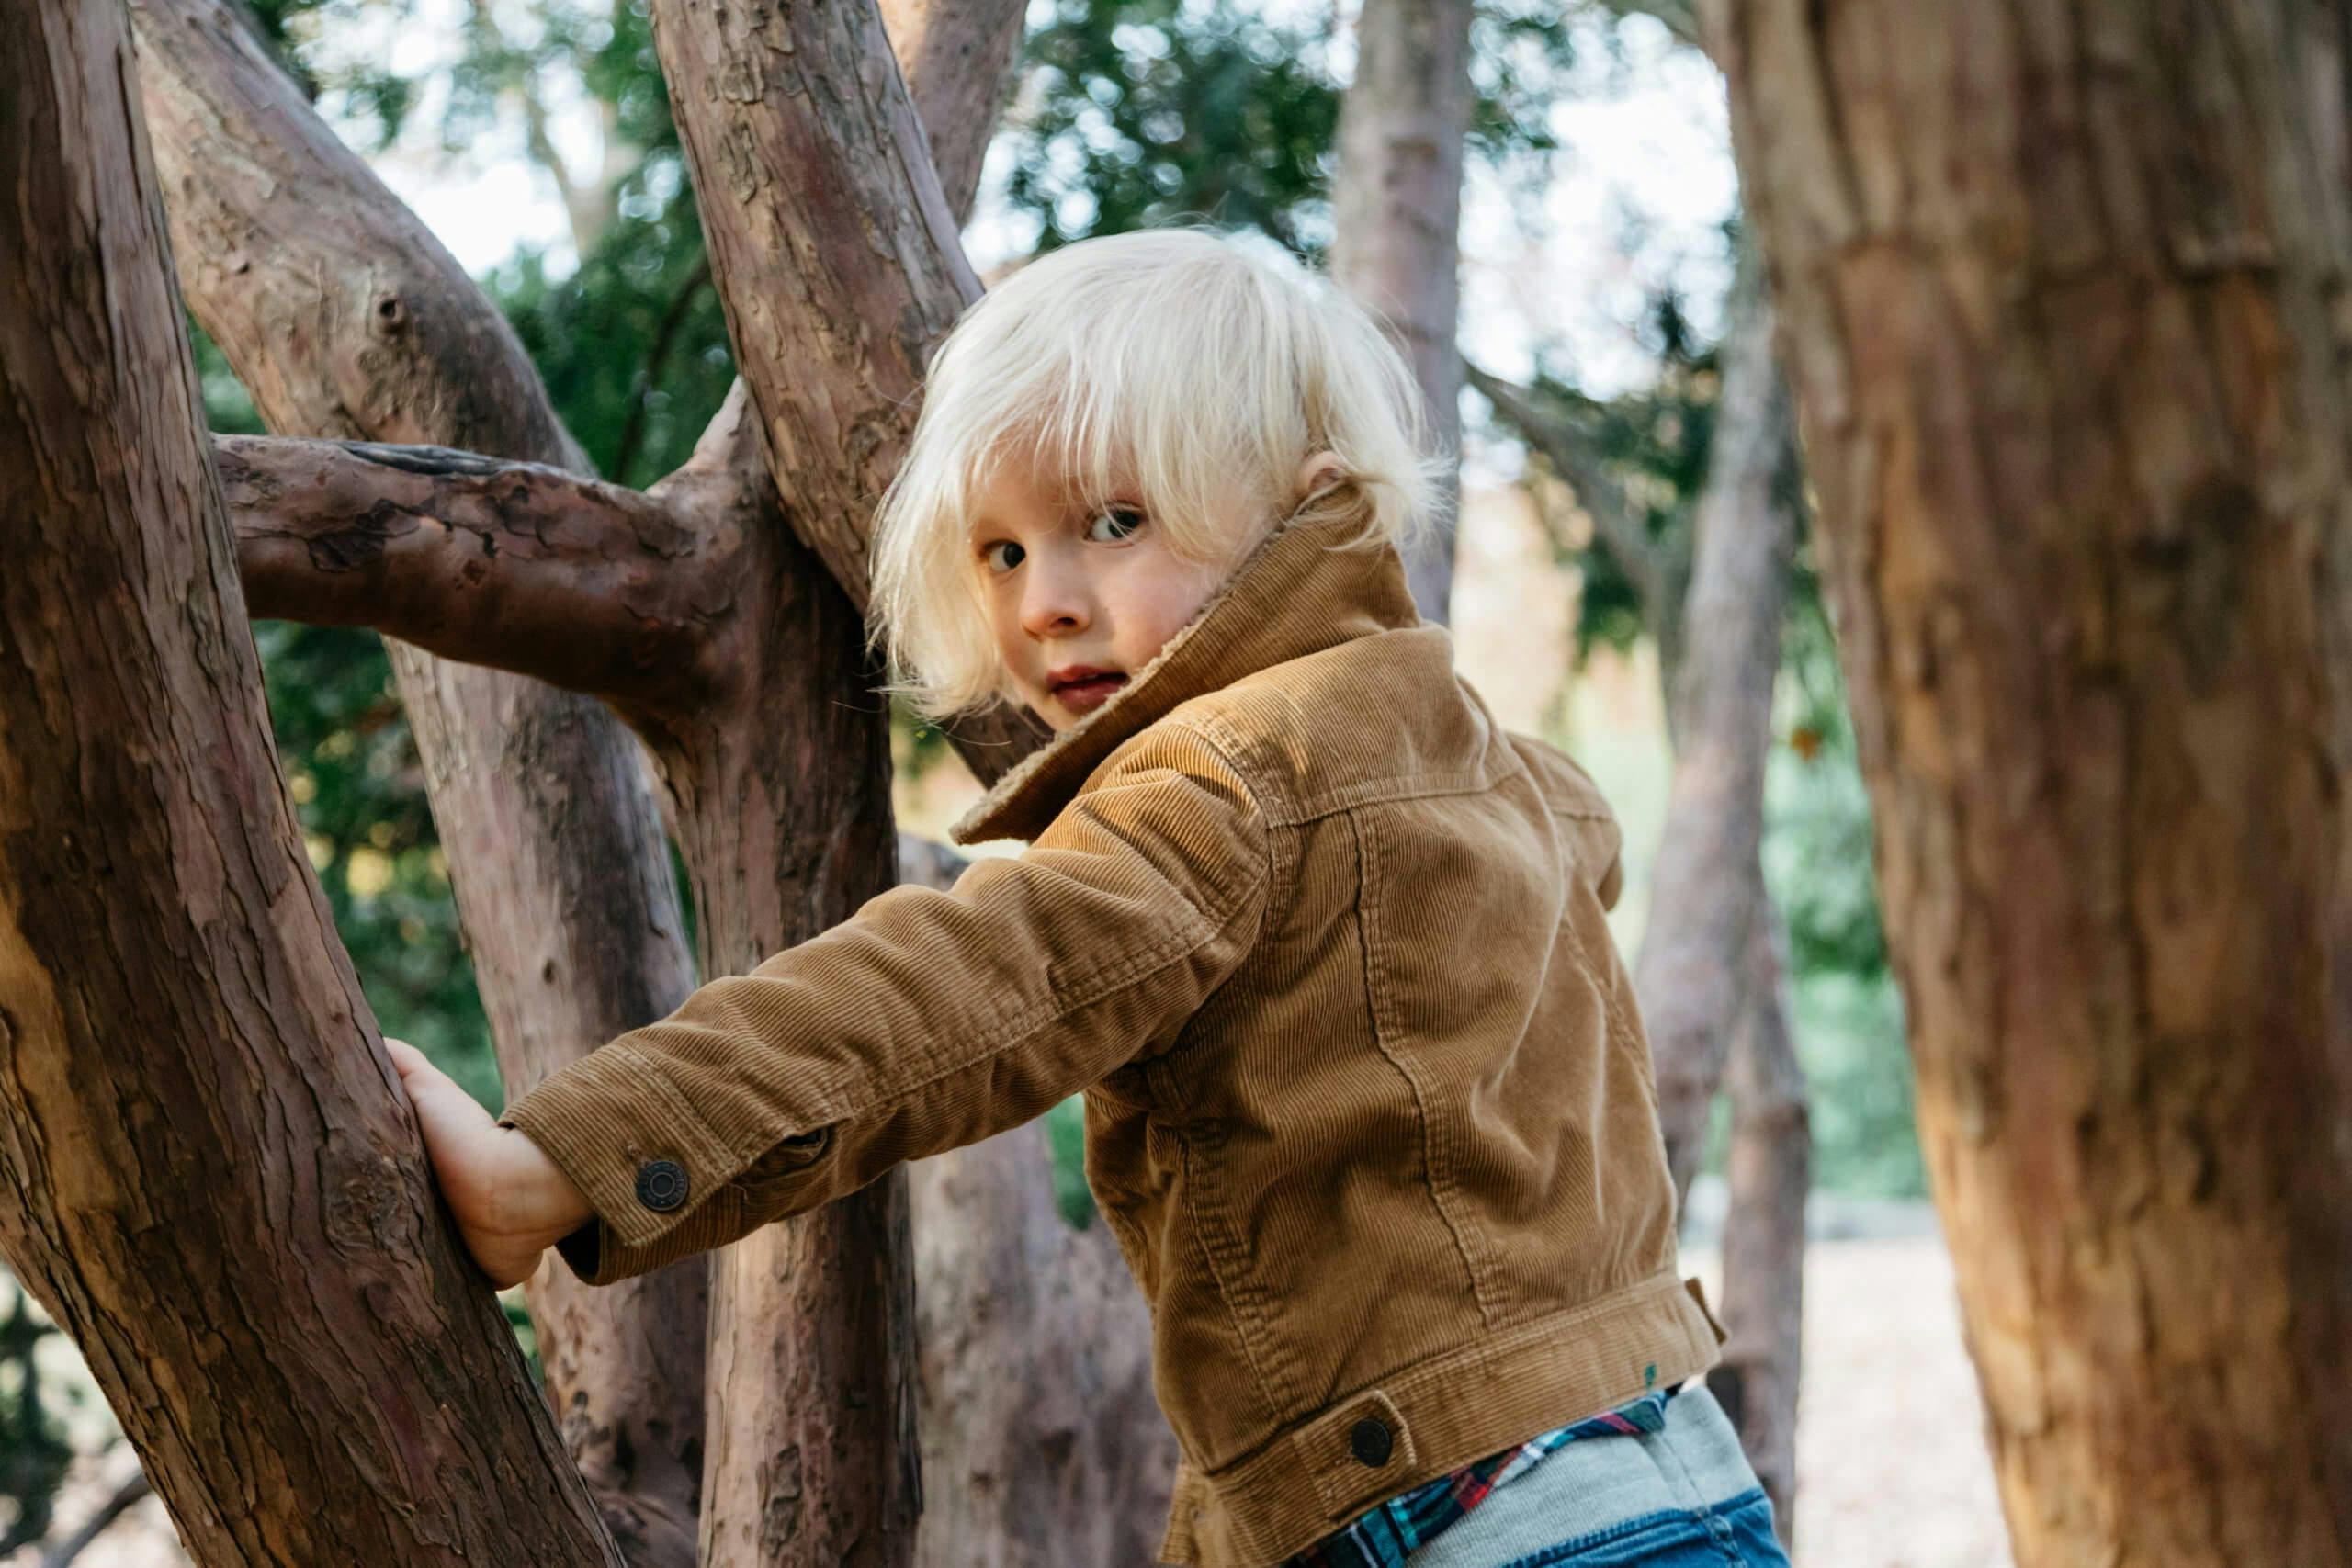 Young blonde child climbing a tree branch, looking back at the camera